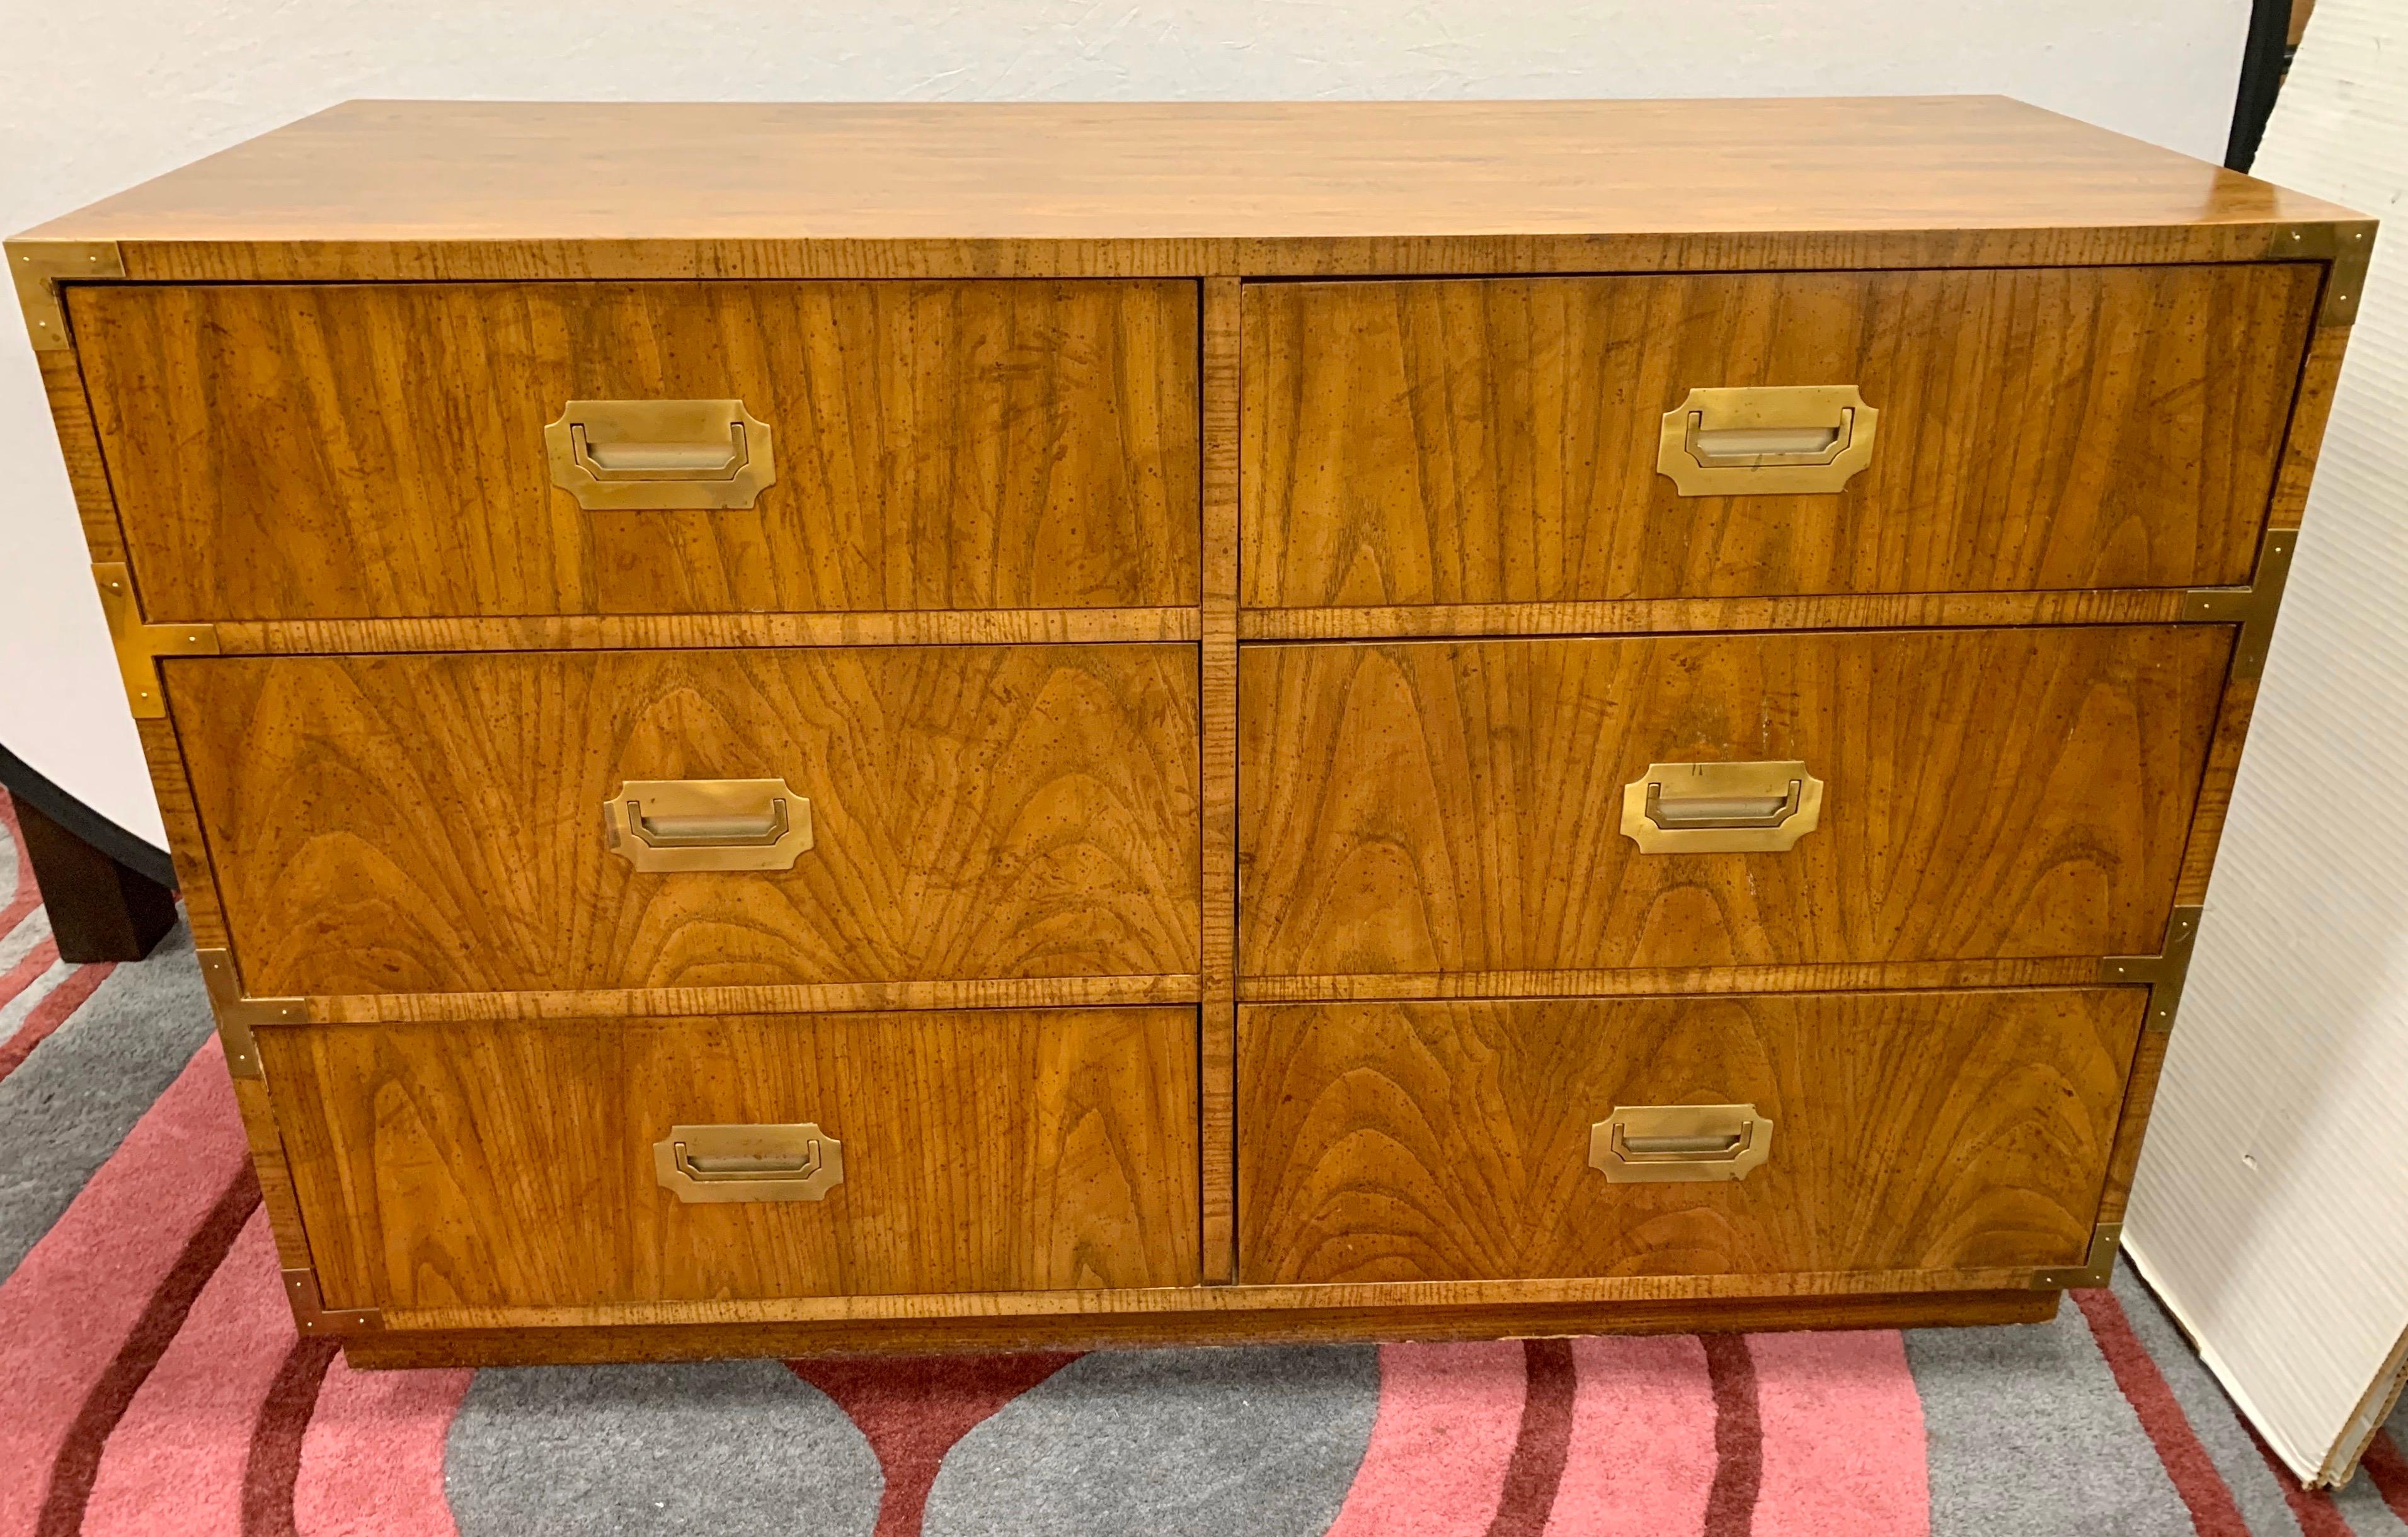 Pair of matching vintage campaign style dressers with original recessed brass pulls and hardware. Six fully functioning dovetailed drawers glide smoothly on center tracks on each piece. Marked Dixie and Campaigner inside top drawer.